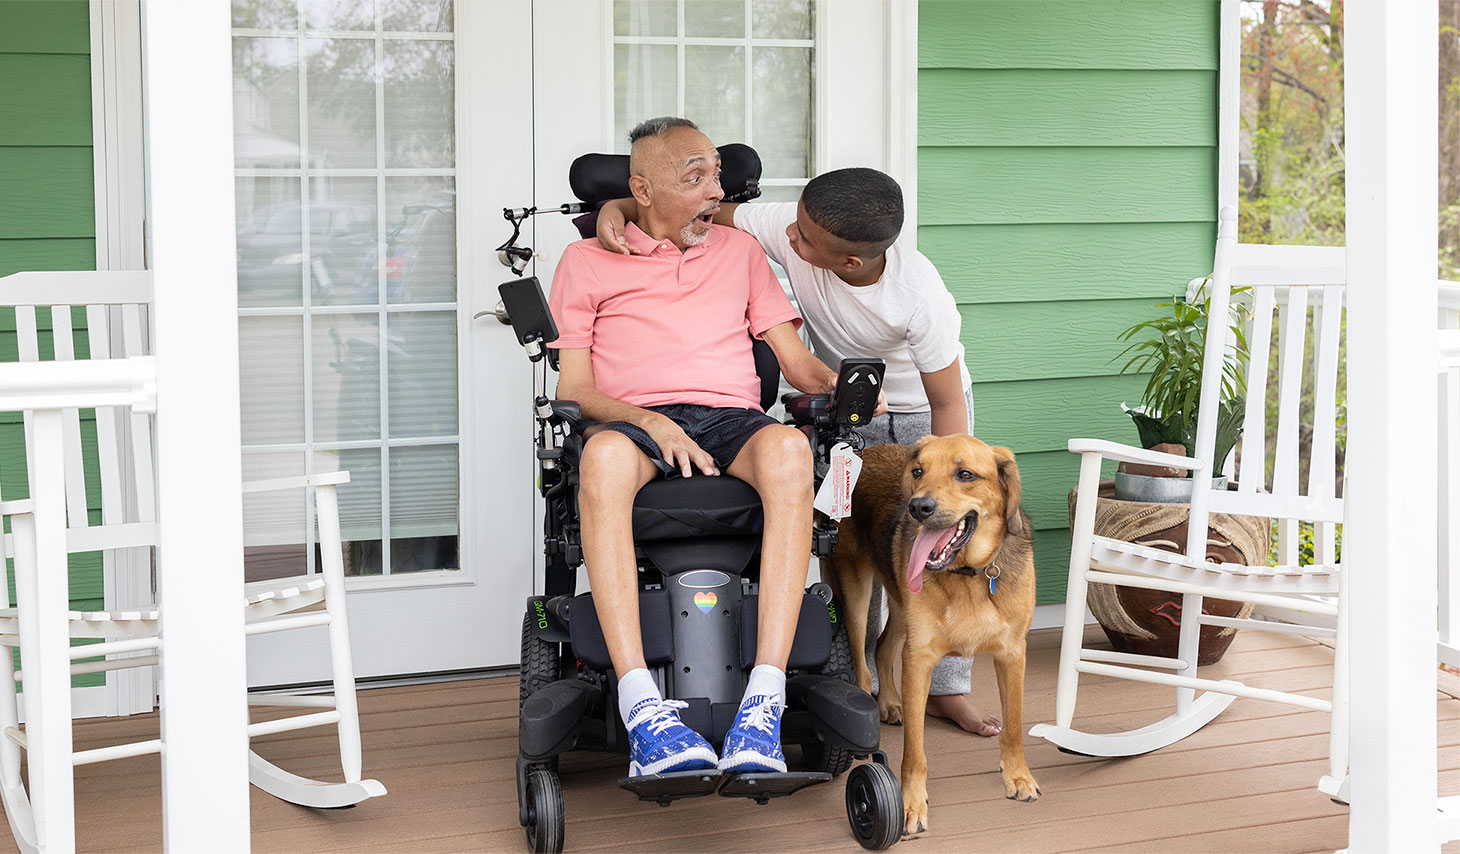 ALS patient in motorized chair with family member and dog